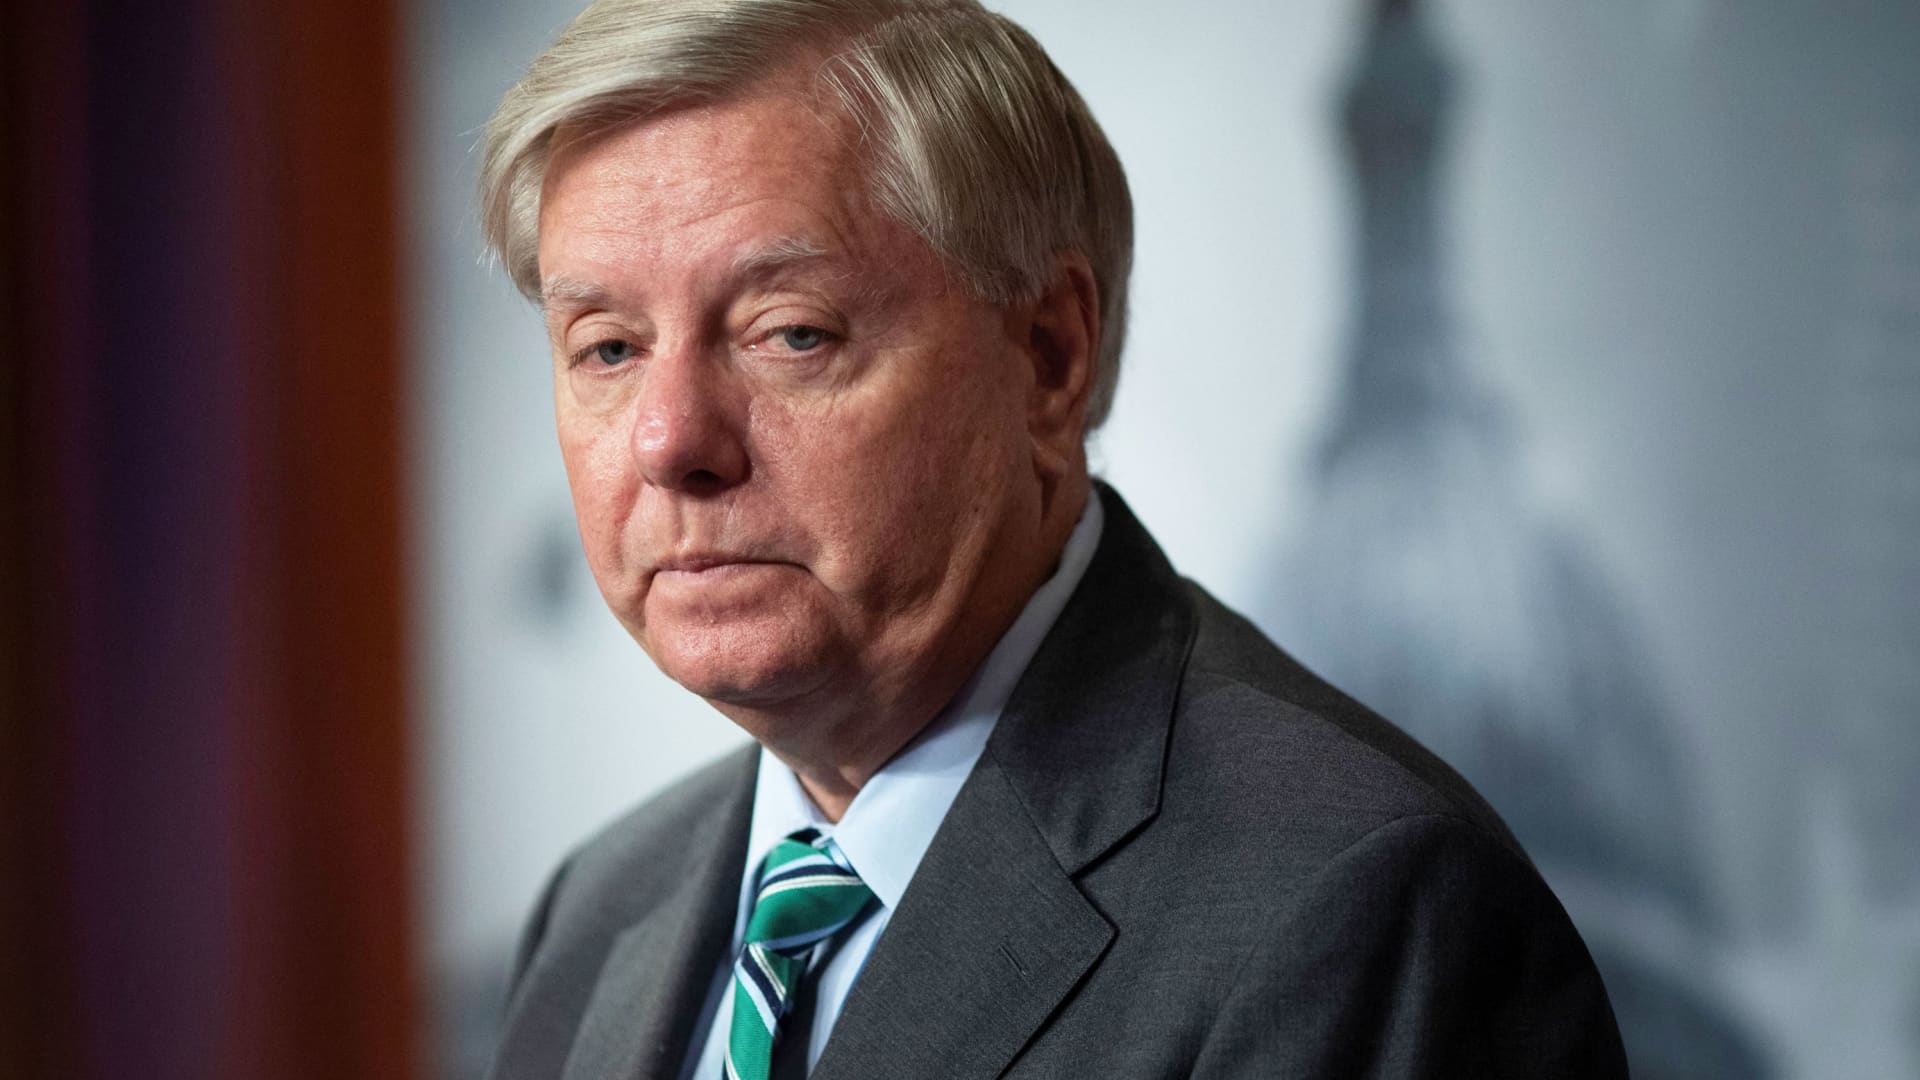 Sen. Lindsey Graham loses appeals court bid to stall testimony in Trump election interference probe